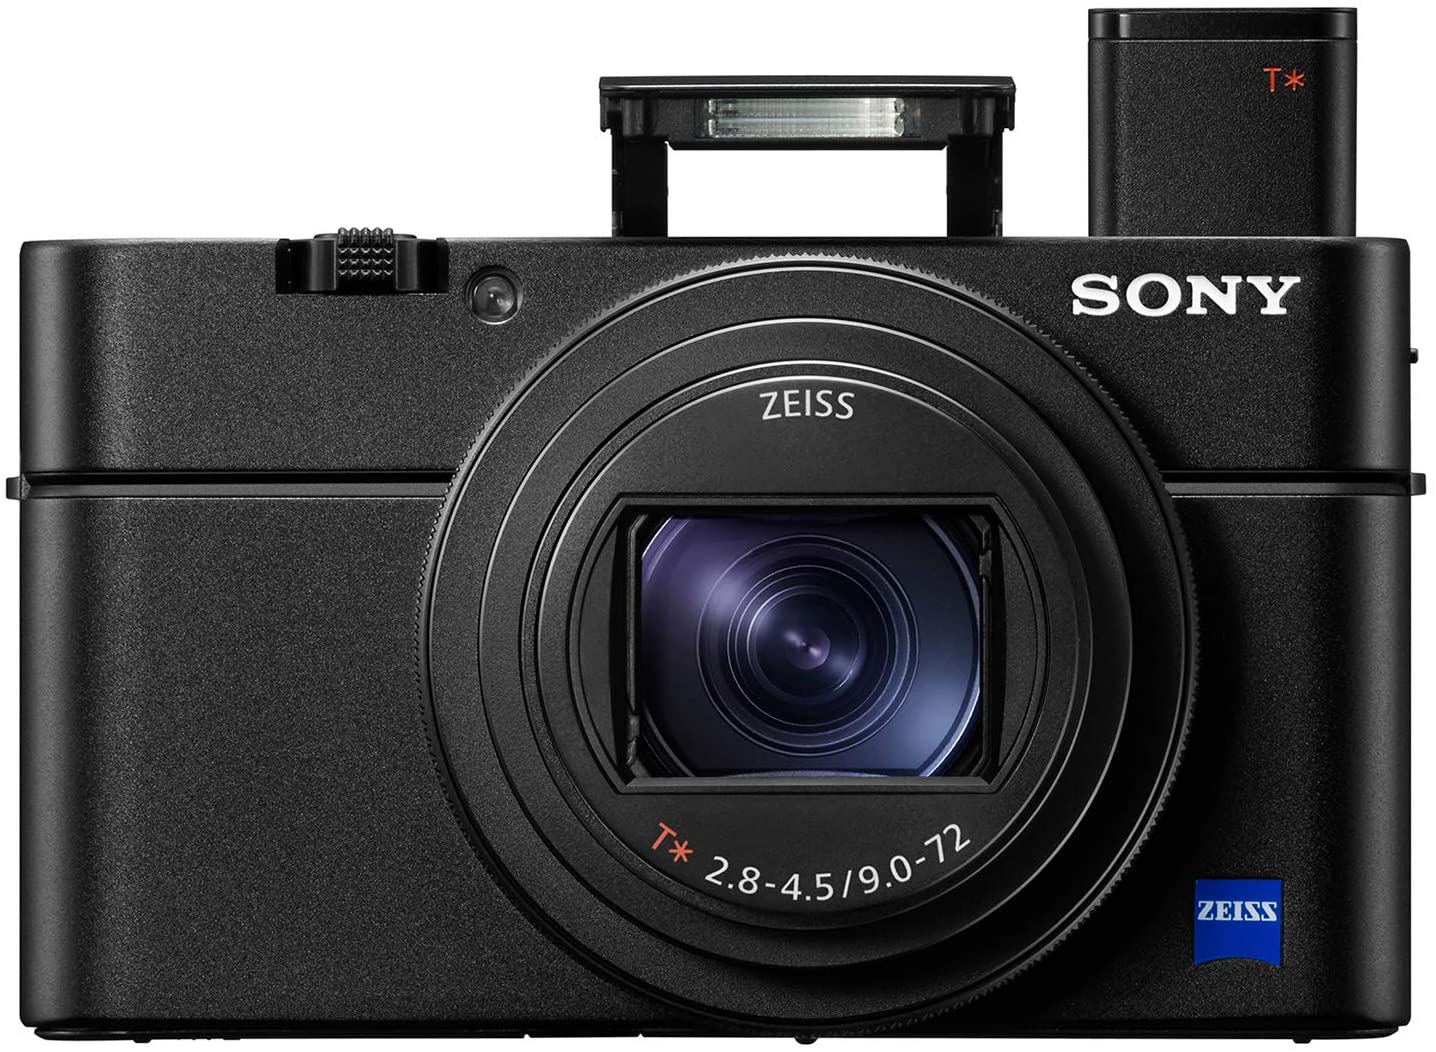 Advanced Eye AF System For Concert Shooting Camera | Sony RX-100